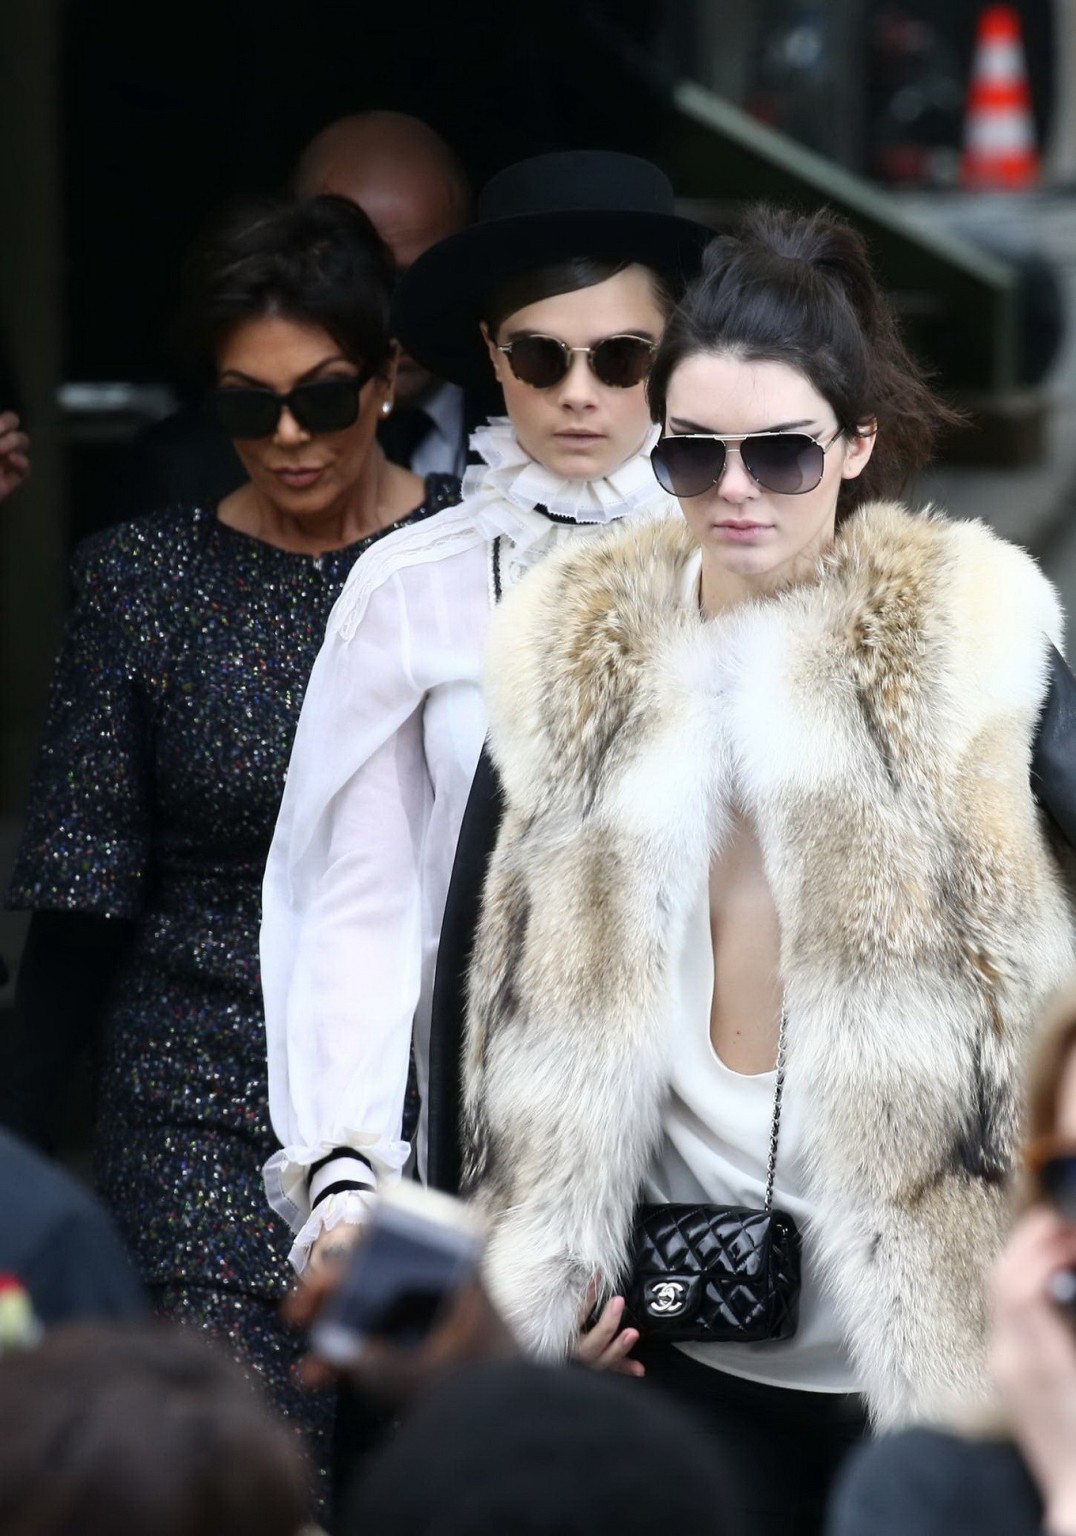 Kendall Jenner braless shows huge cleavage while leaving the Chanel Fashion Show #75170299